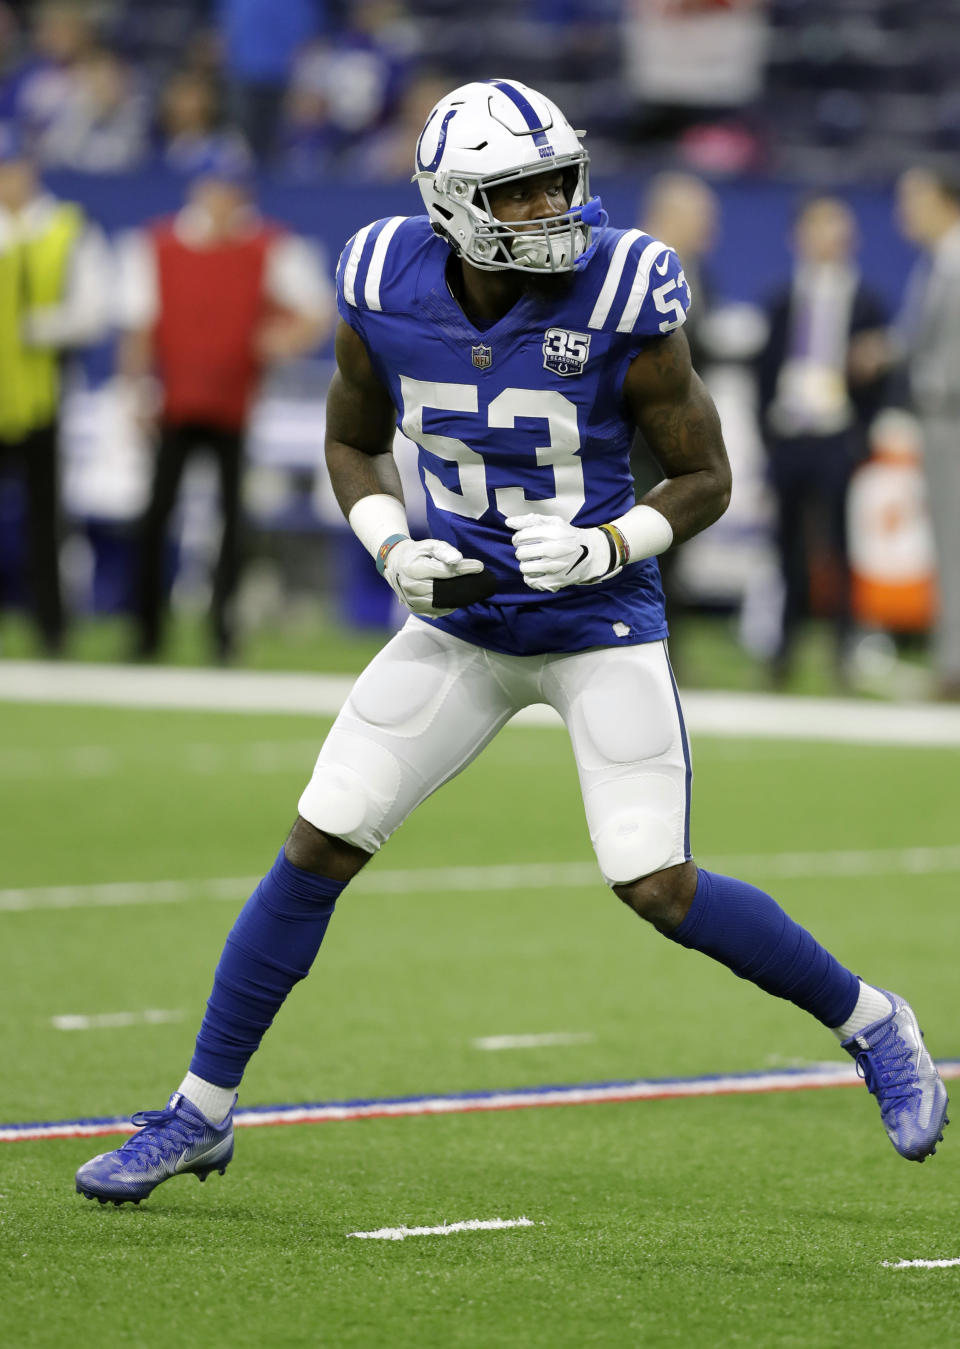 FILE - In this Dec. 23, 2018, file photo, Indianapolis Colts outside linebacker Darius Leonard (53) warms up before an NFL football game against the New York Giants in Indianapolis. On Friday, Darius Leonard and Quenton Nelson were rewarded for their remarkable debut seasons by becoming the second set of rookie teammates to be named first-team All-Pro. Gale Sayers and Dick Butkus were the other players to achieve the feat in 1965 and both went on to have Hall of Fame careers with the Bears. (AP Photo/Darron Cummings, File)